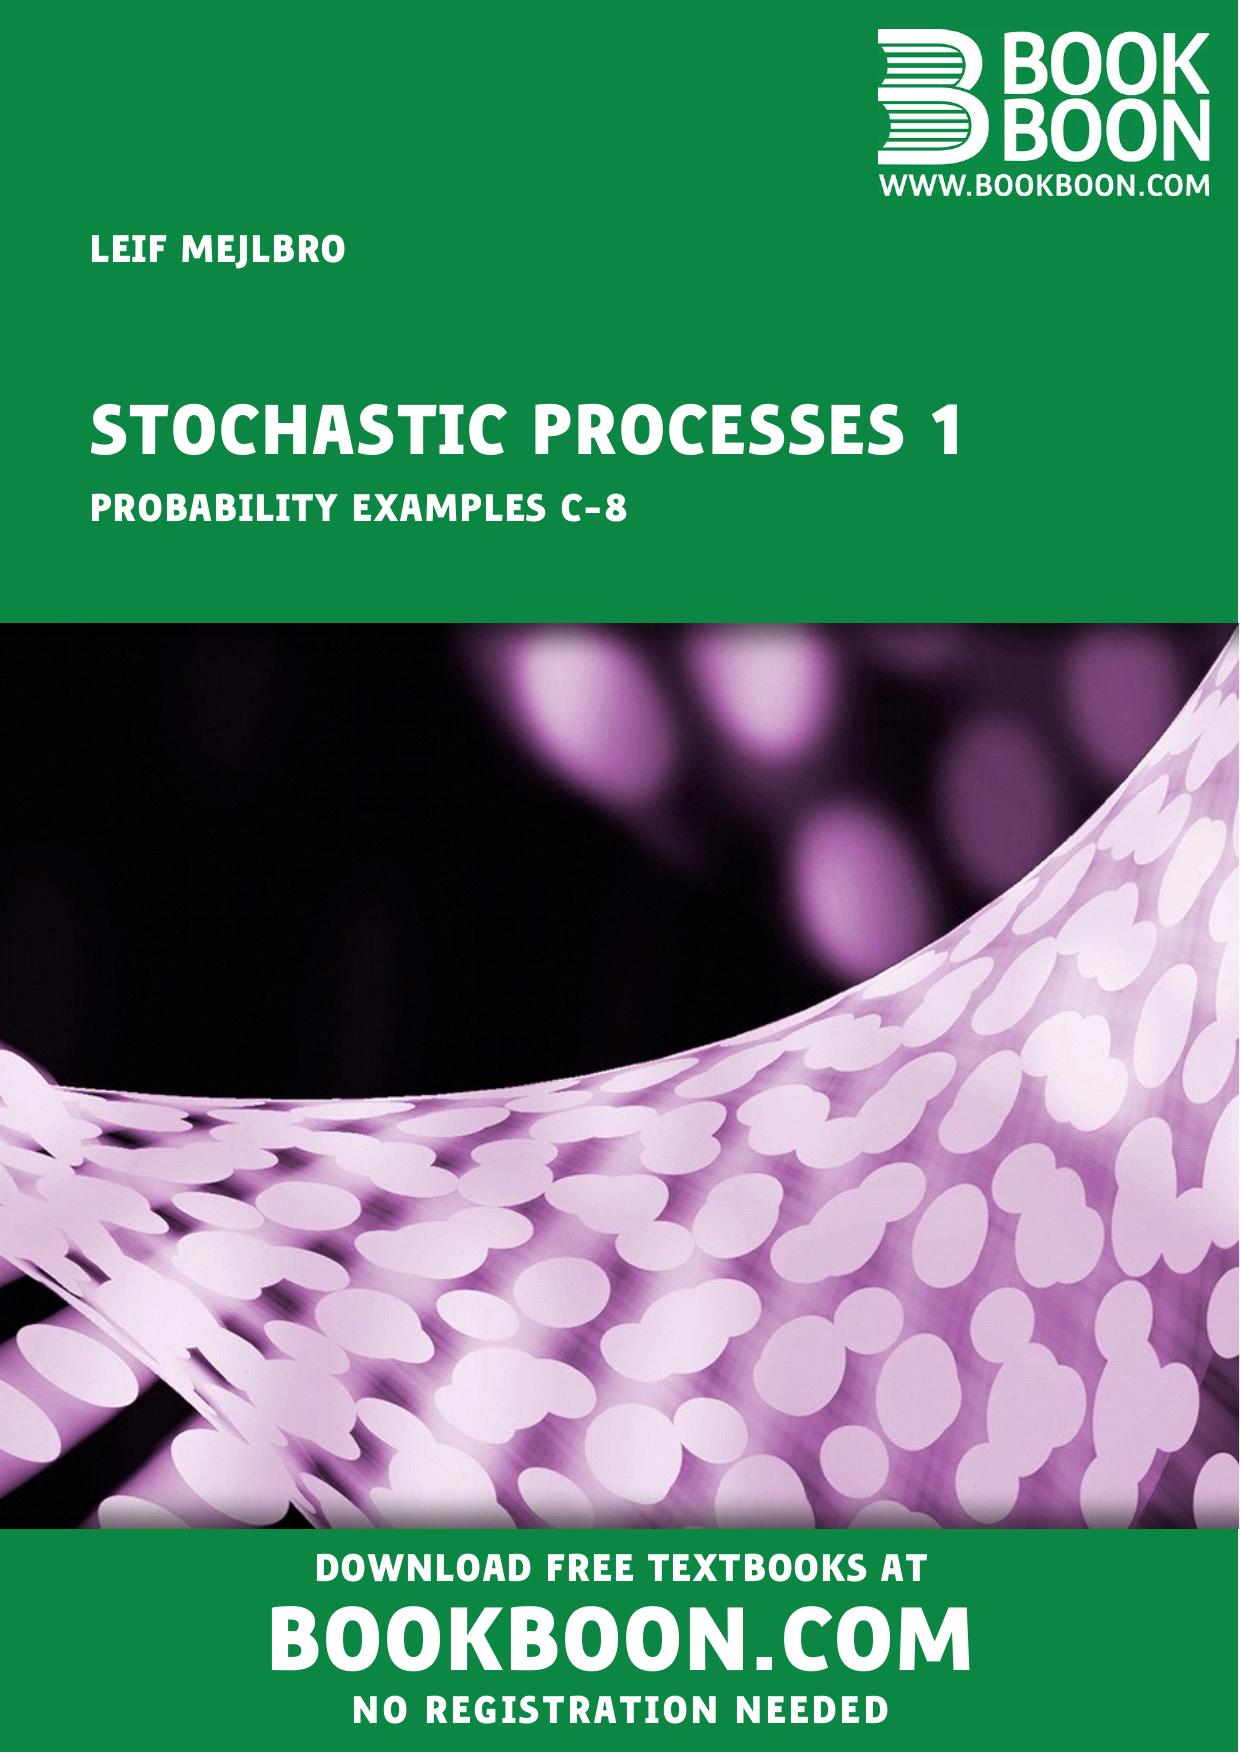 Stochastic Processes 1 - Probability Examples c-8